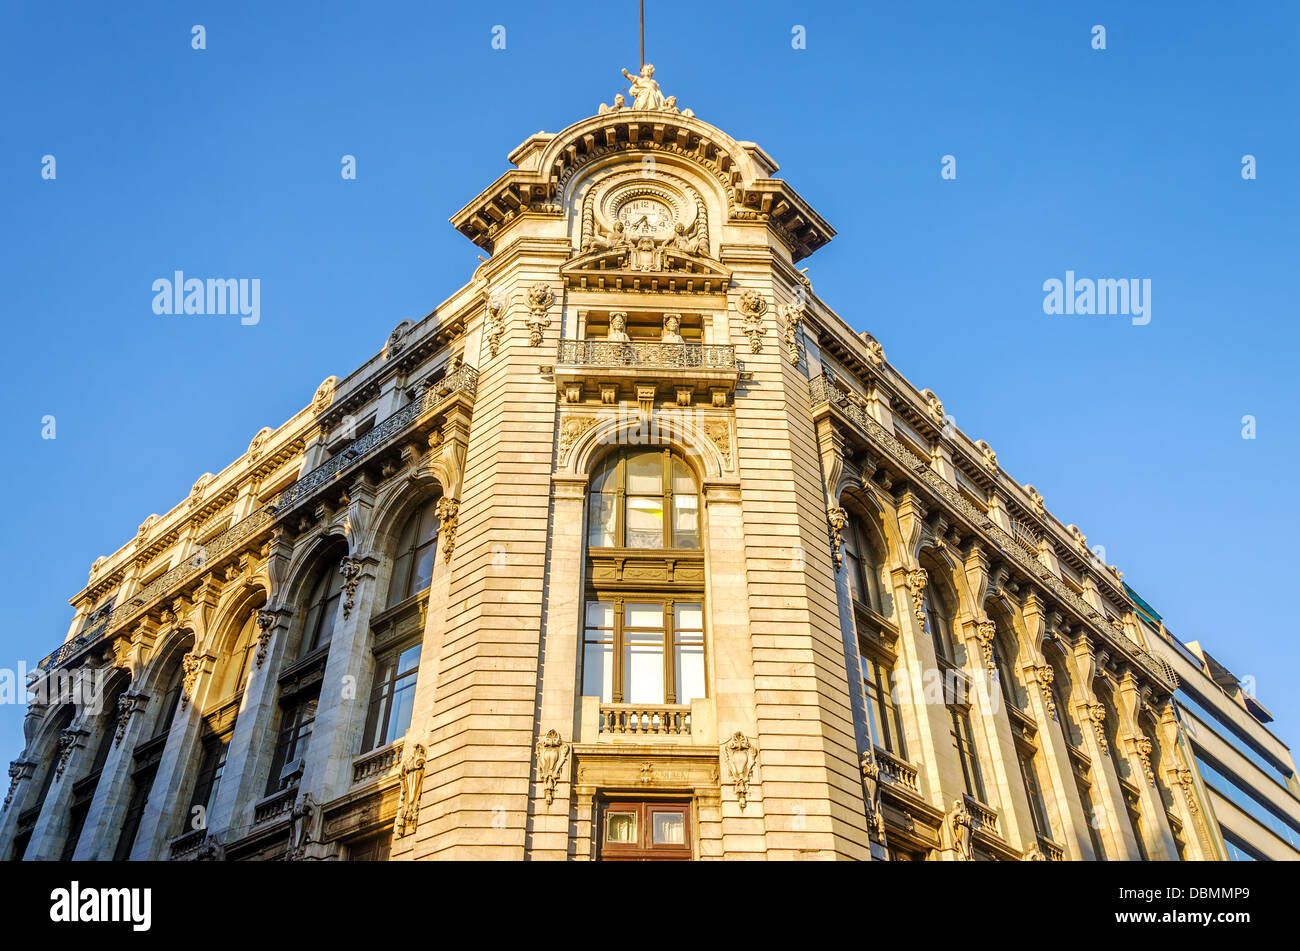 Facade of a historic building in the old part of Mexico City Stock Photo